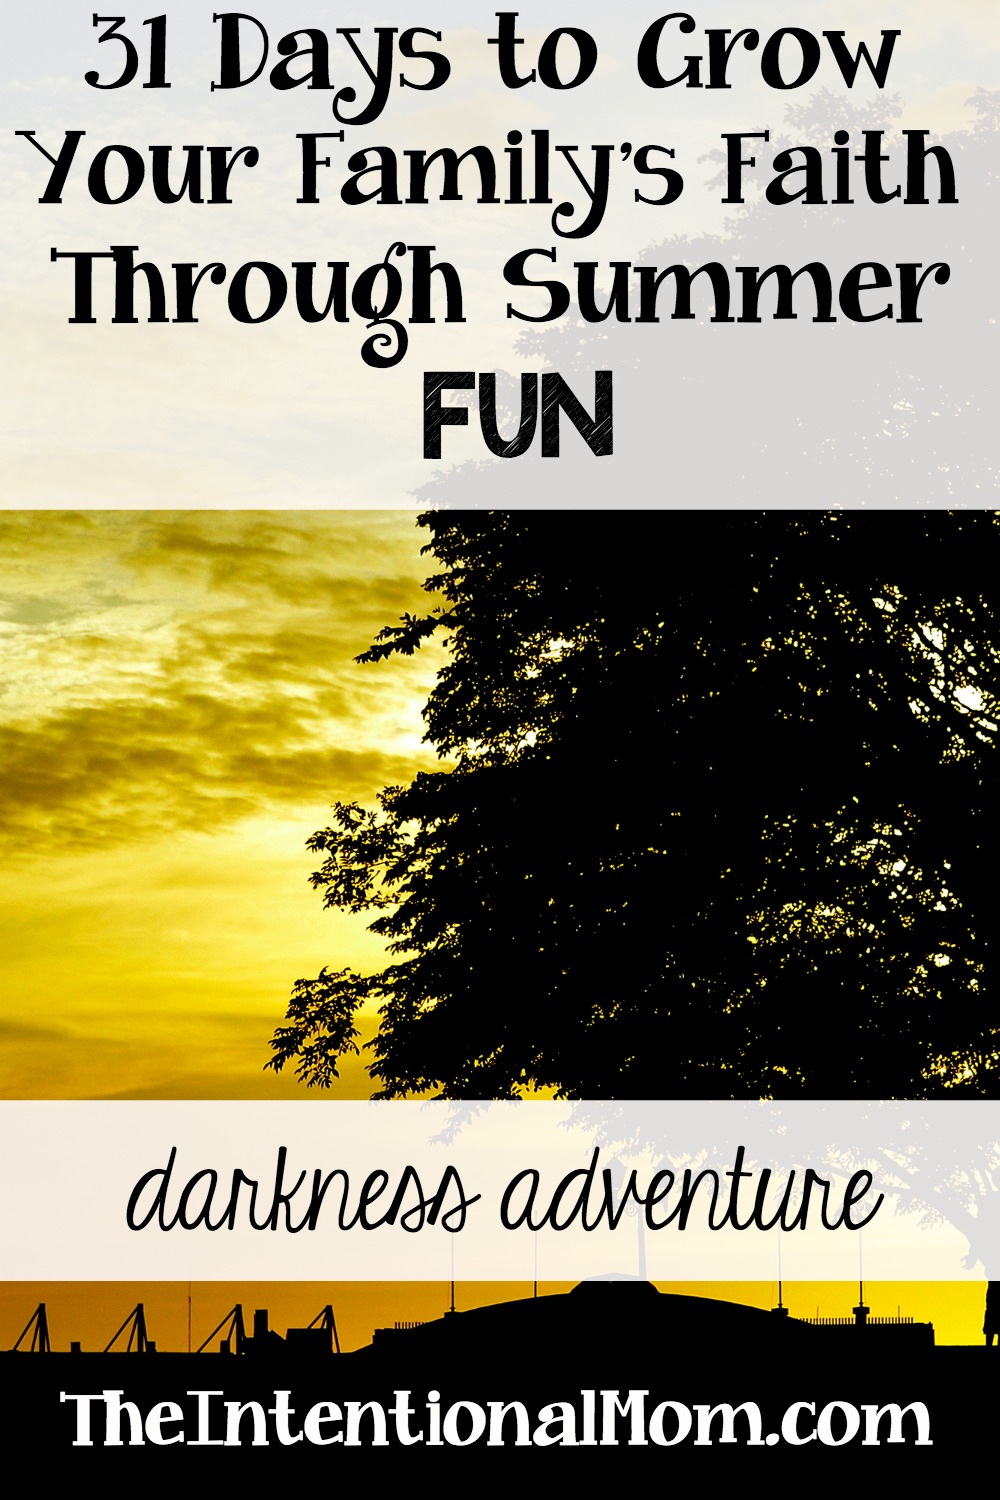 31 Ways to Build Your Family’s Faith Through a Darkness Adventure